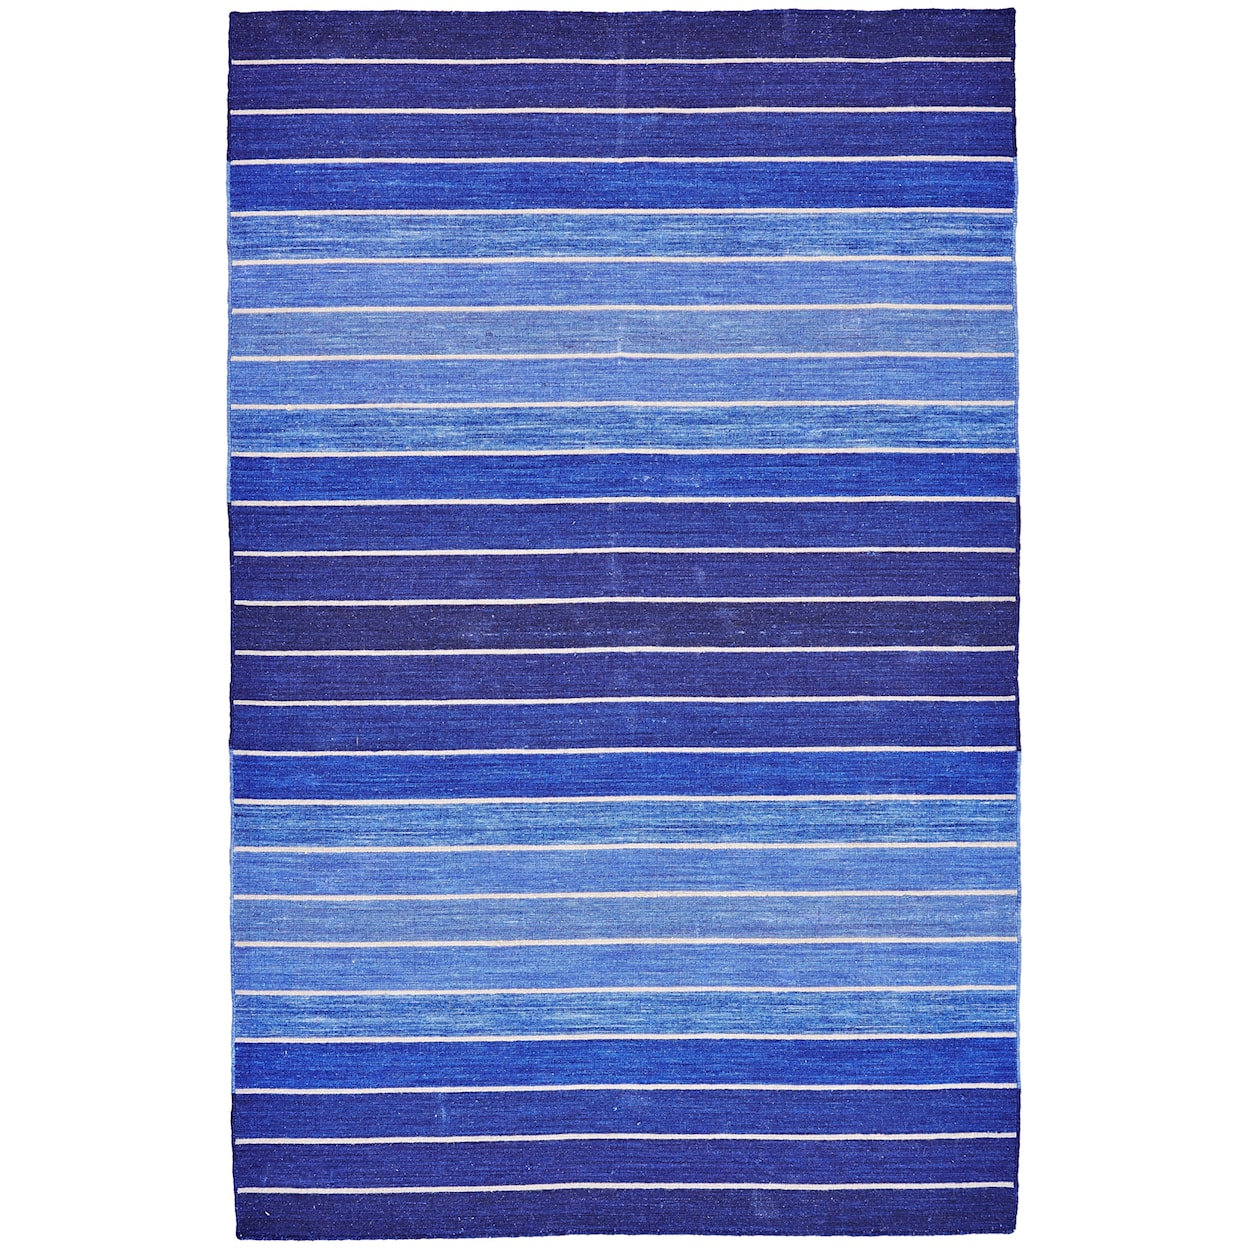 Feizy Rugs Santino Blue 9' x 9 Square Area Rug